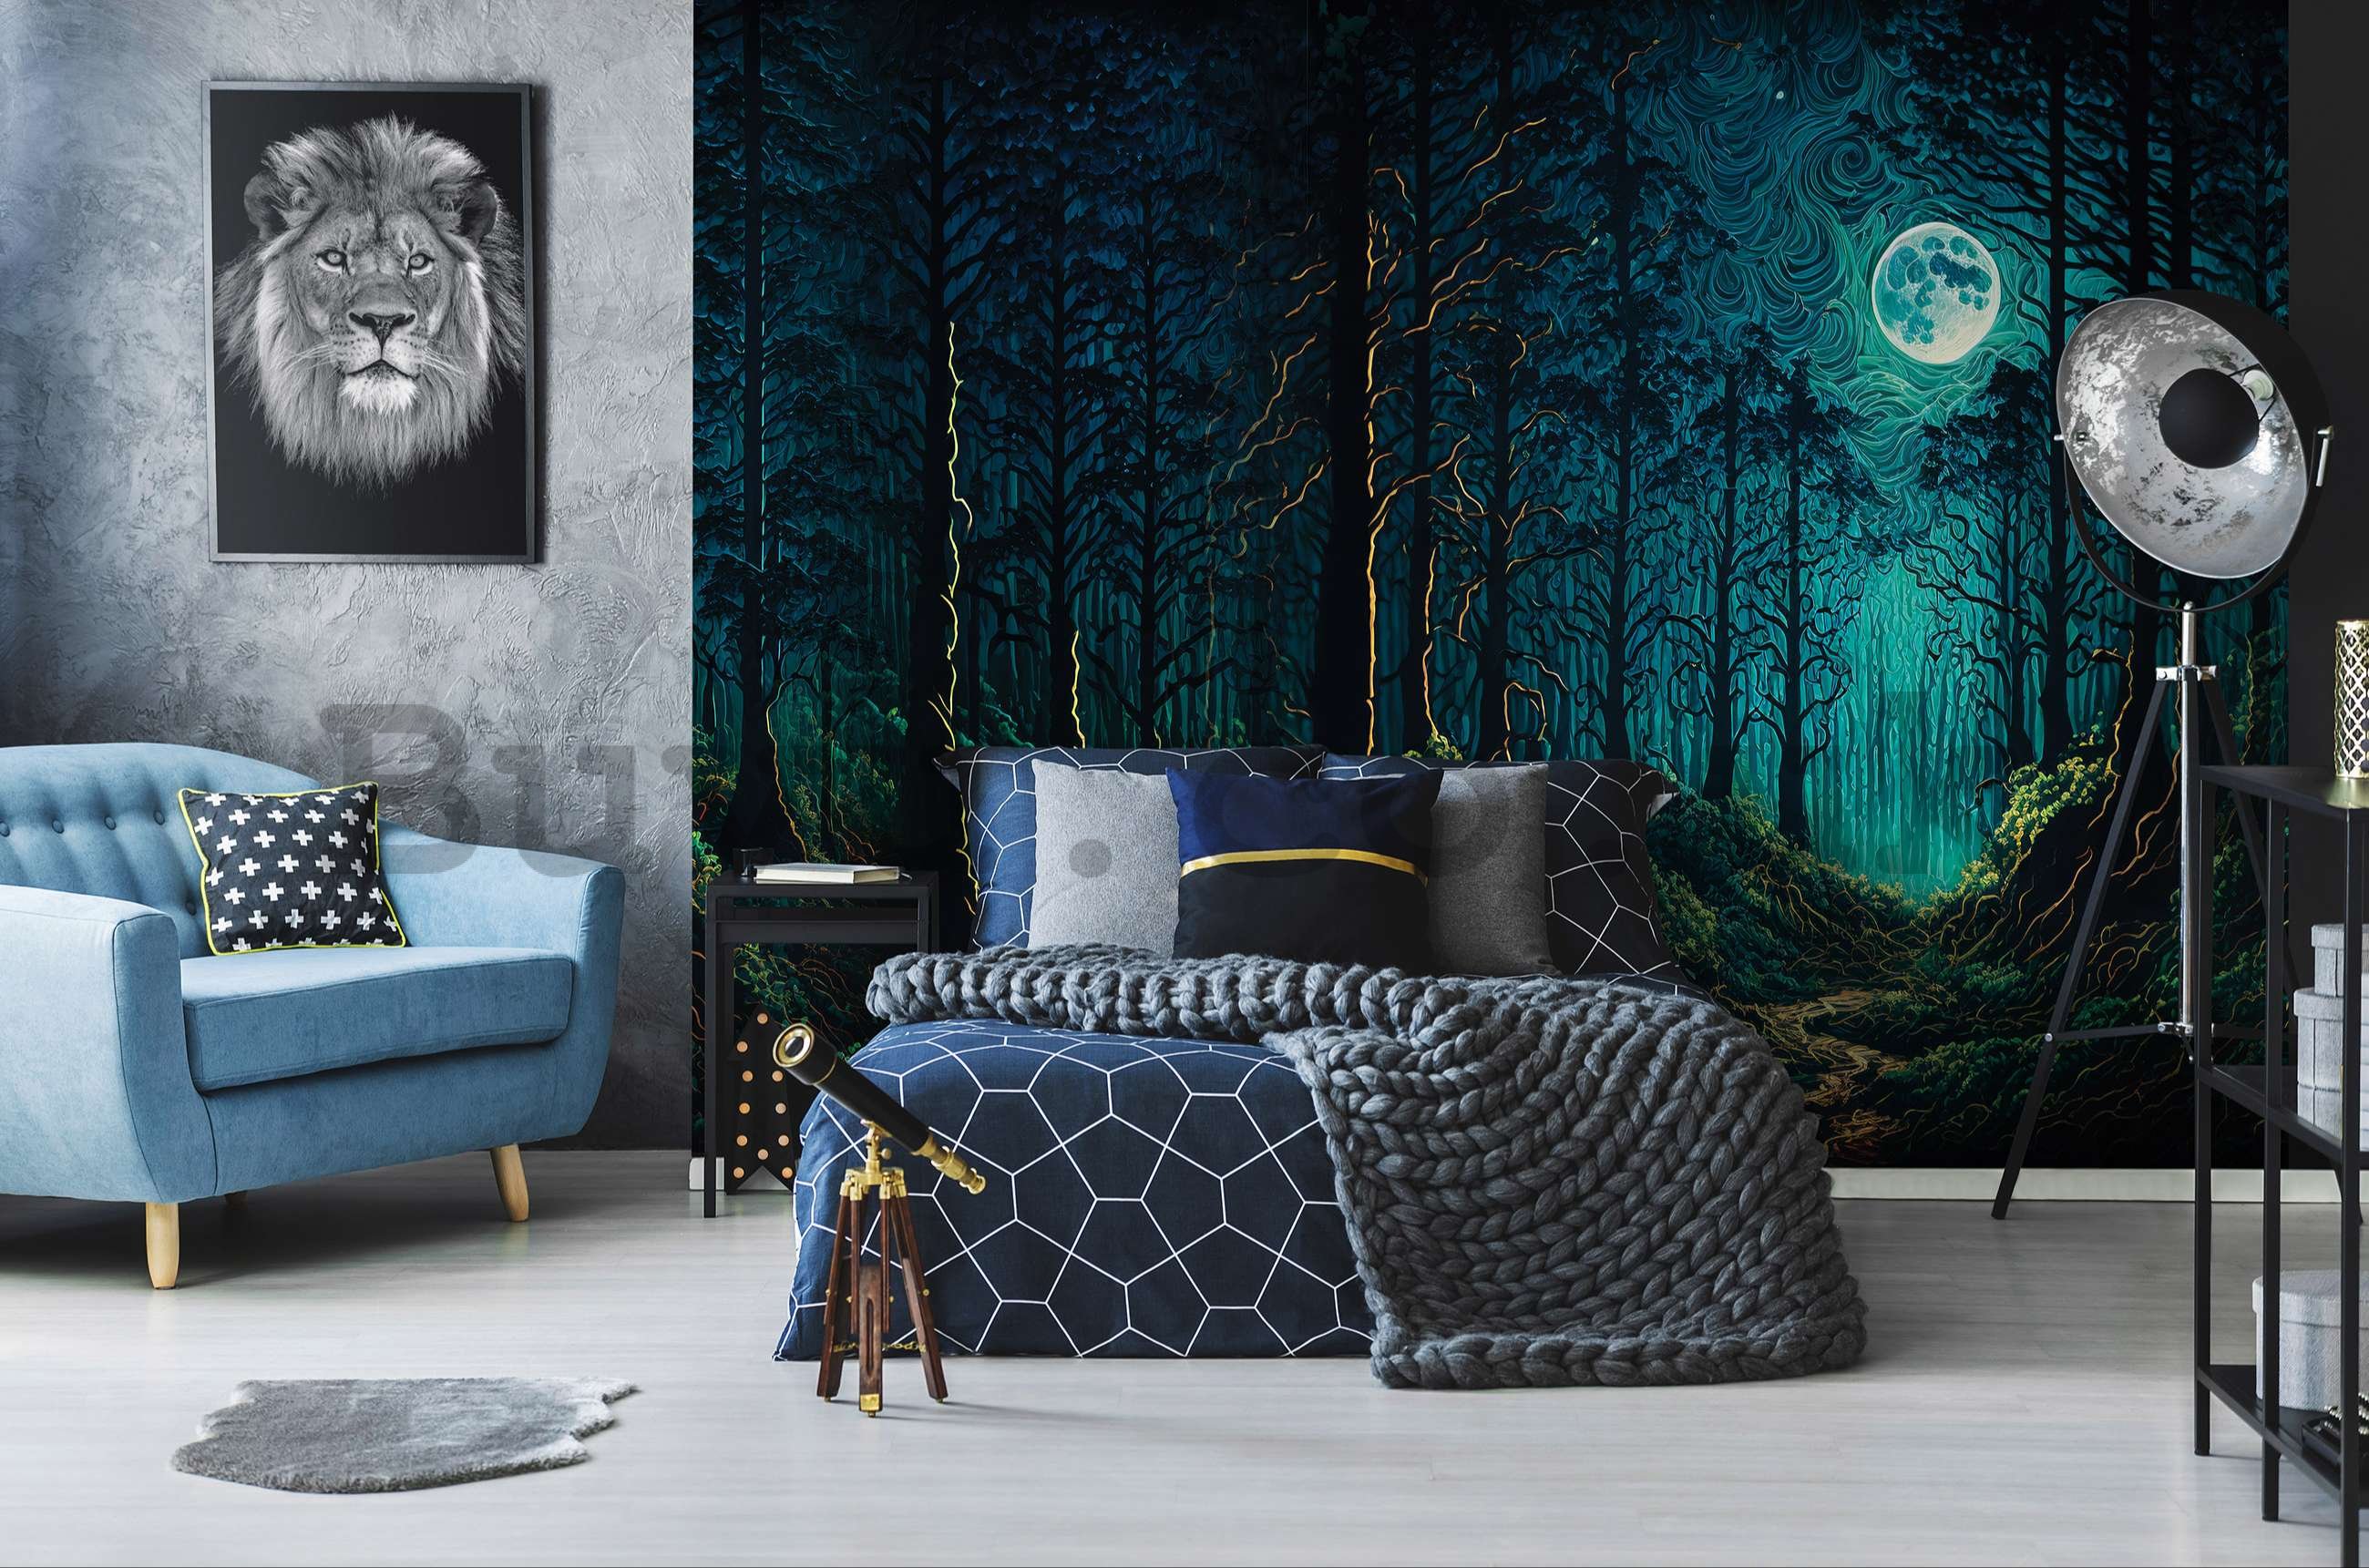 Wall mural vlies: Enchanted forest in the moonlight - 254x184 cm